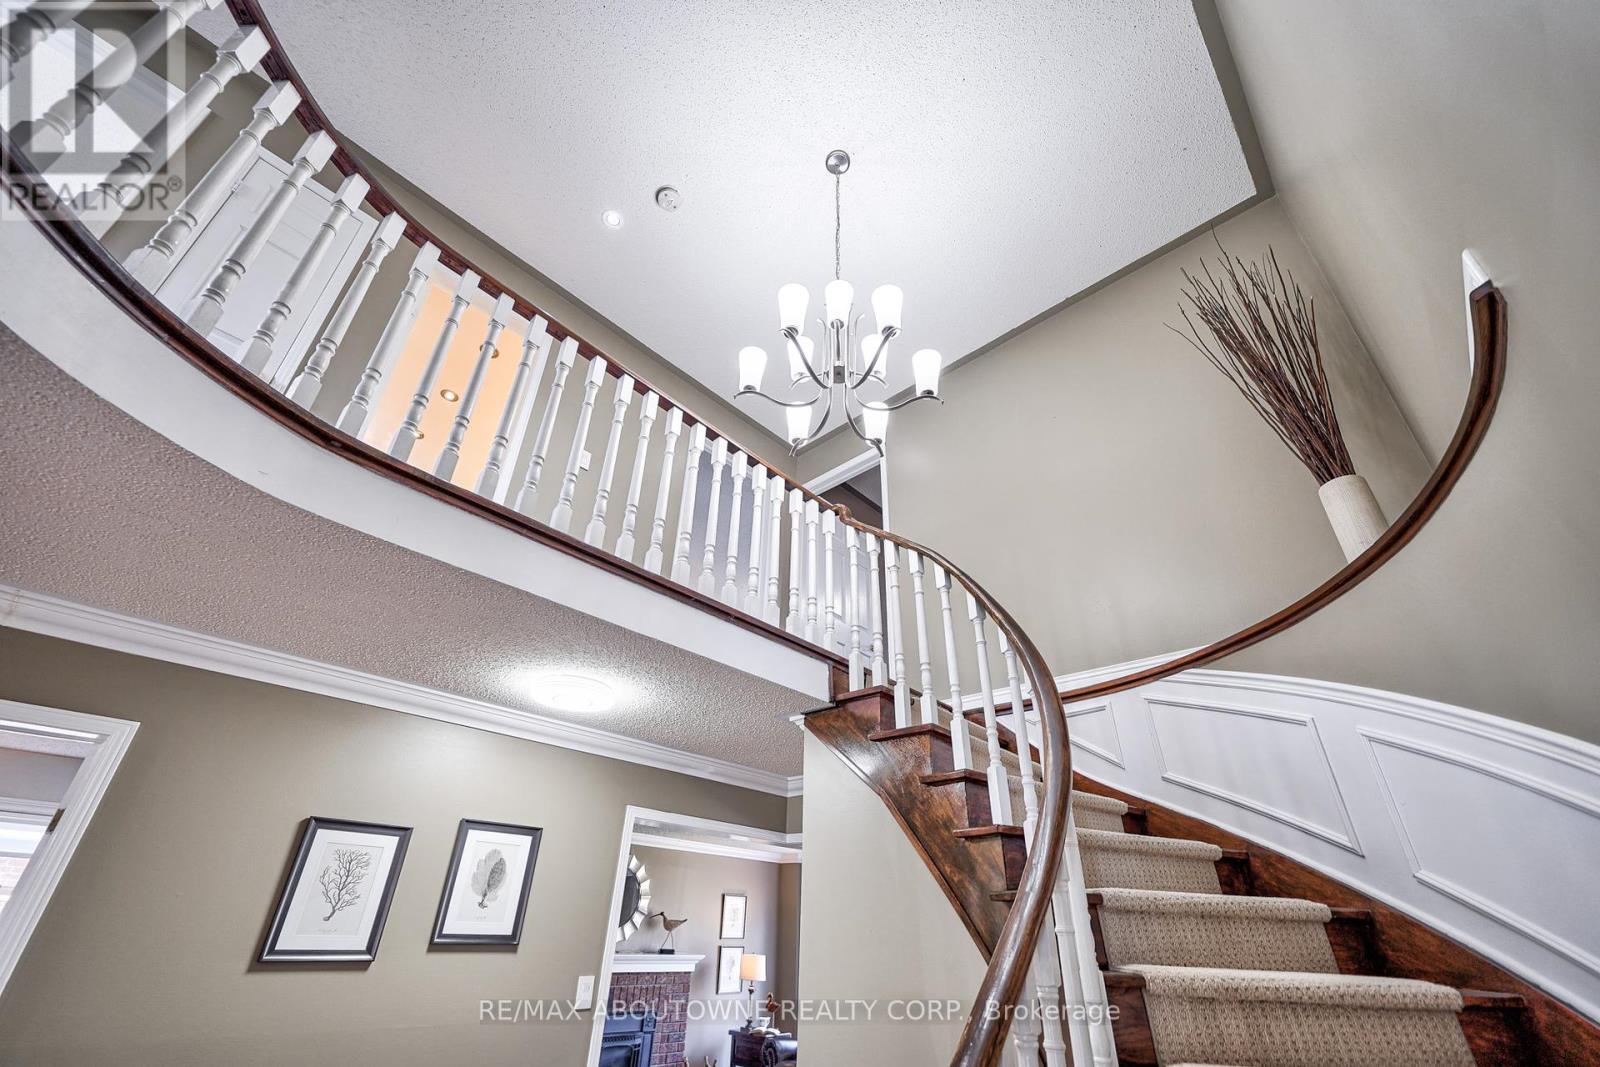 












1237 OLD COLONY RD

,
Oakville,




Ontario
L6M1K8

